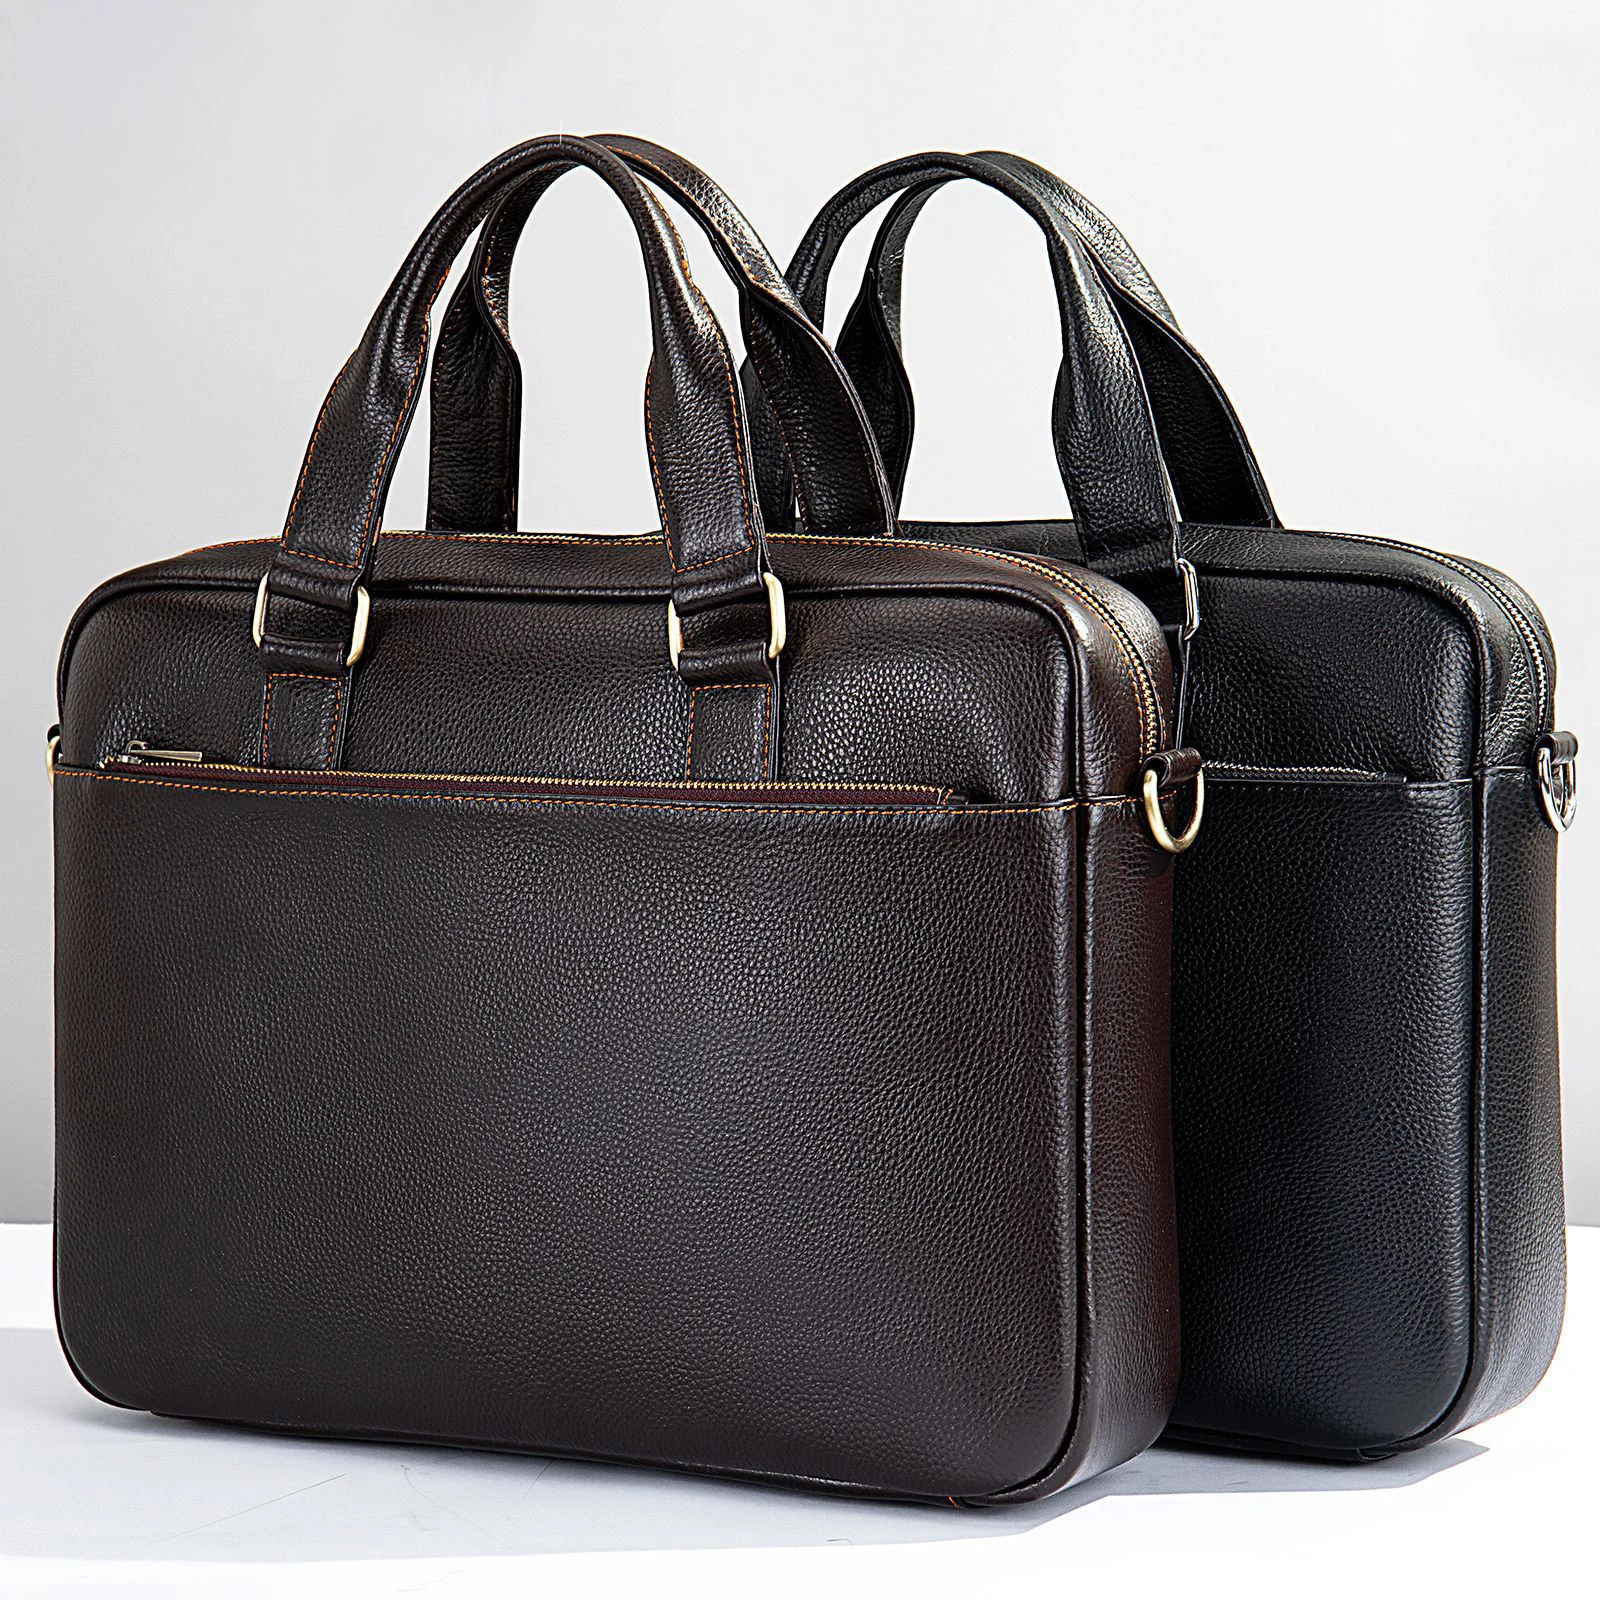 2023-new-fashion-laptop-bags-cow-genuine-leather-men's-briefcase-luxury-brand-male-handbags-messenger-14-inch-computer-bag